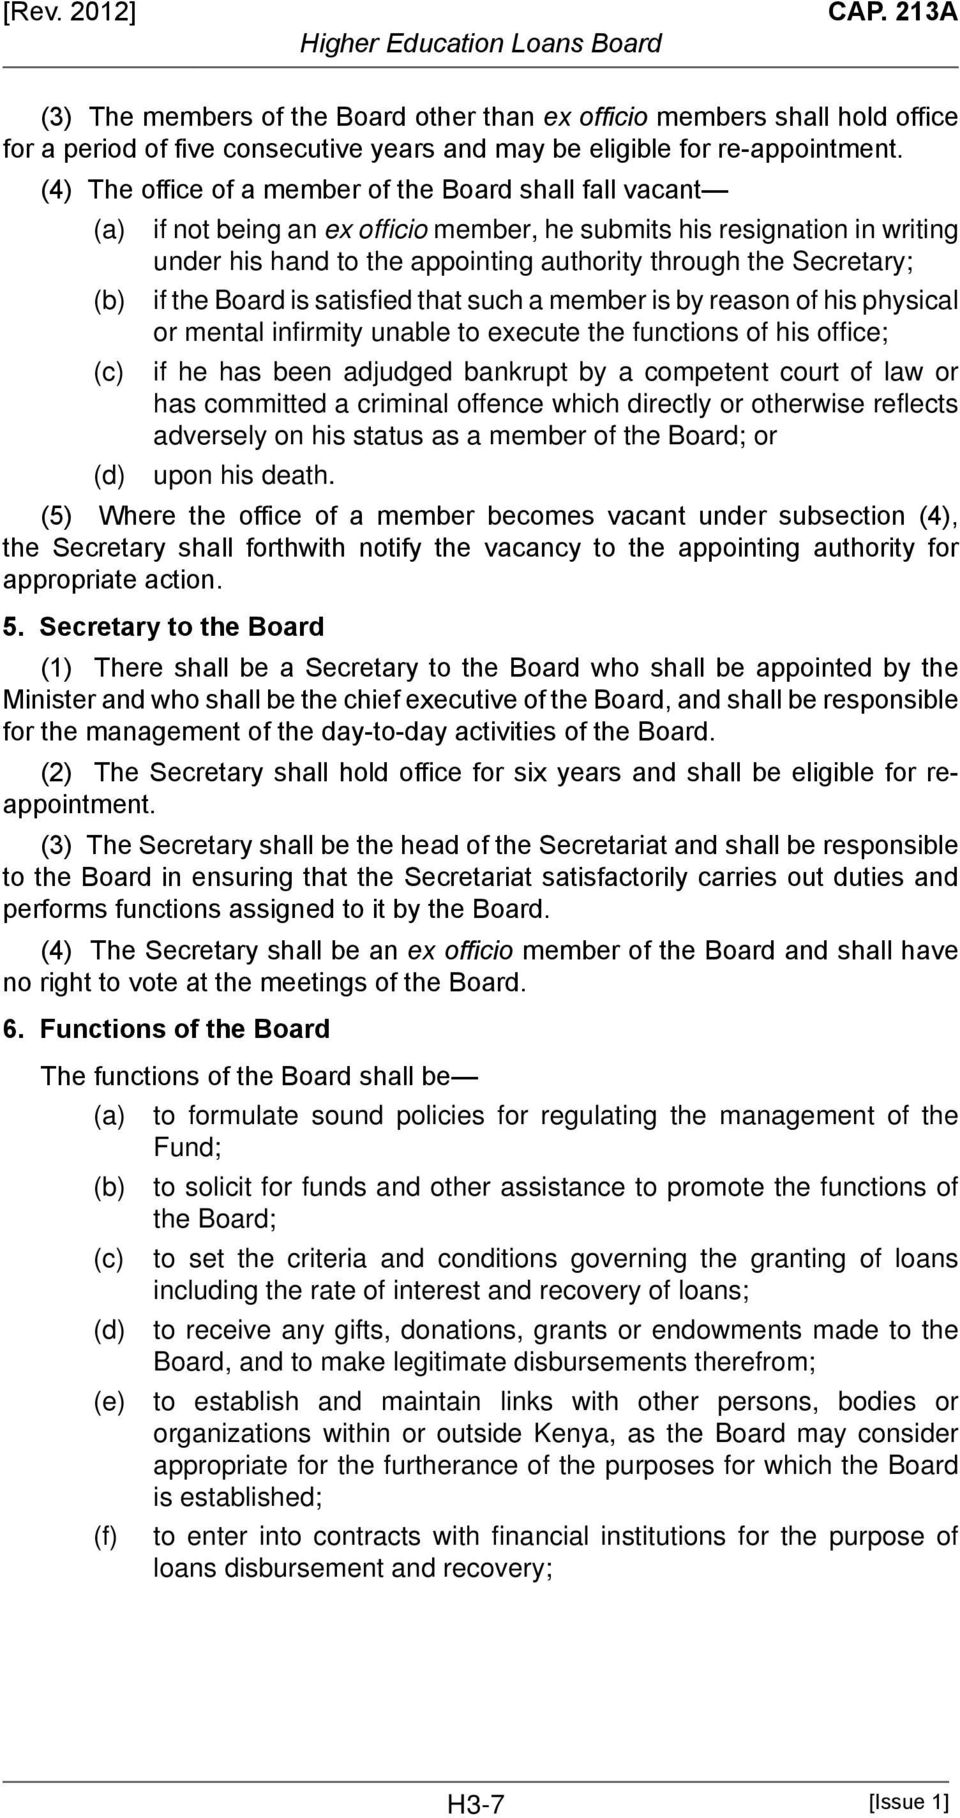 Secretary; if the Board is satisfied that such a member is by reason of his physical or mental infirmity unable to execute the functions of his office; if he has been adjudged bankrupt by a competent